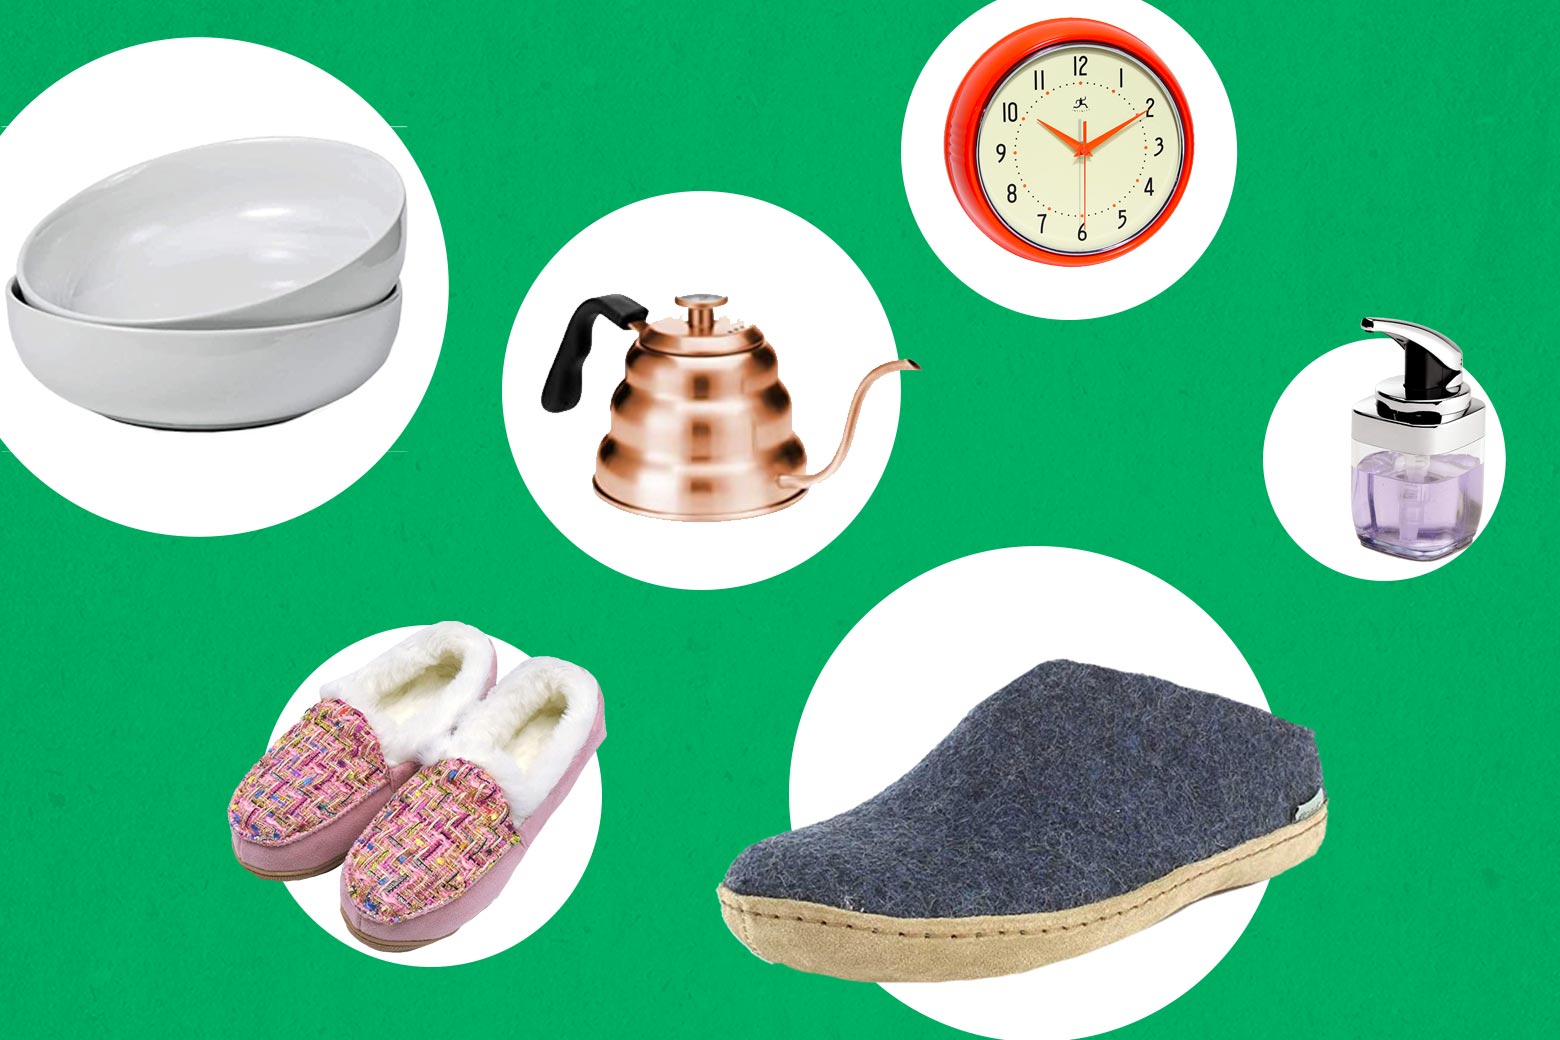 Collage of slippers, a clock, a soap dispenser and a set of white bowls on white dots against a green background.